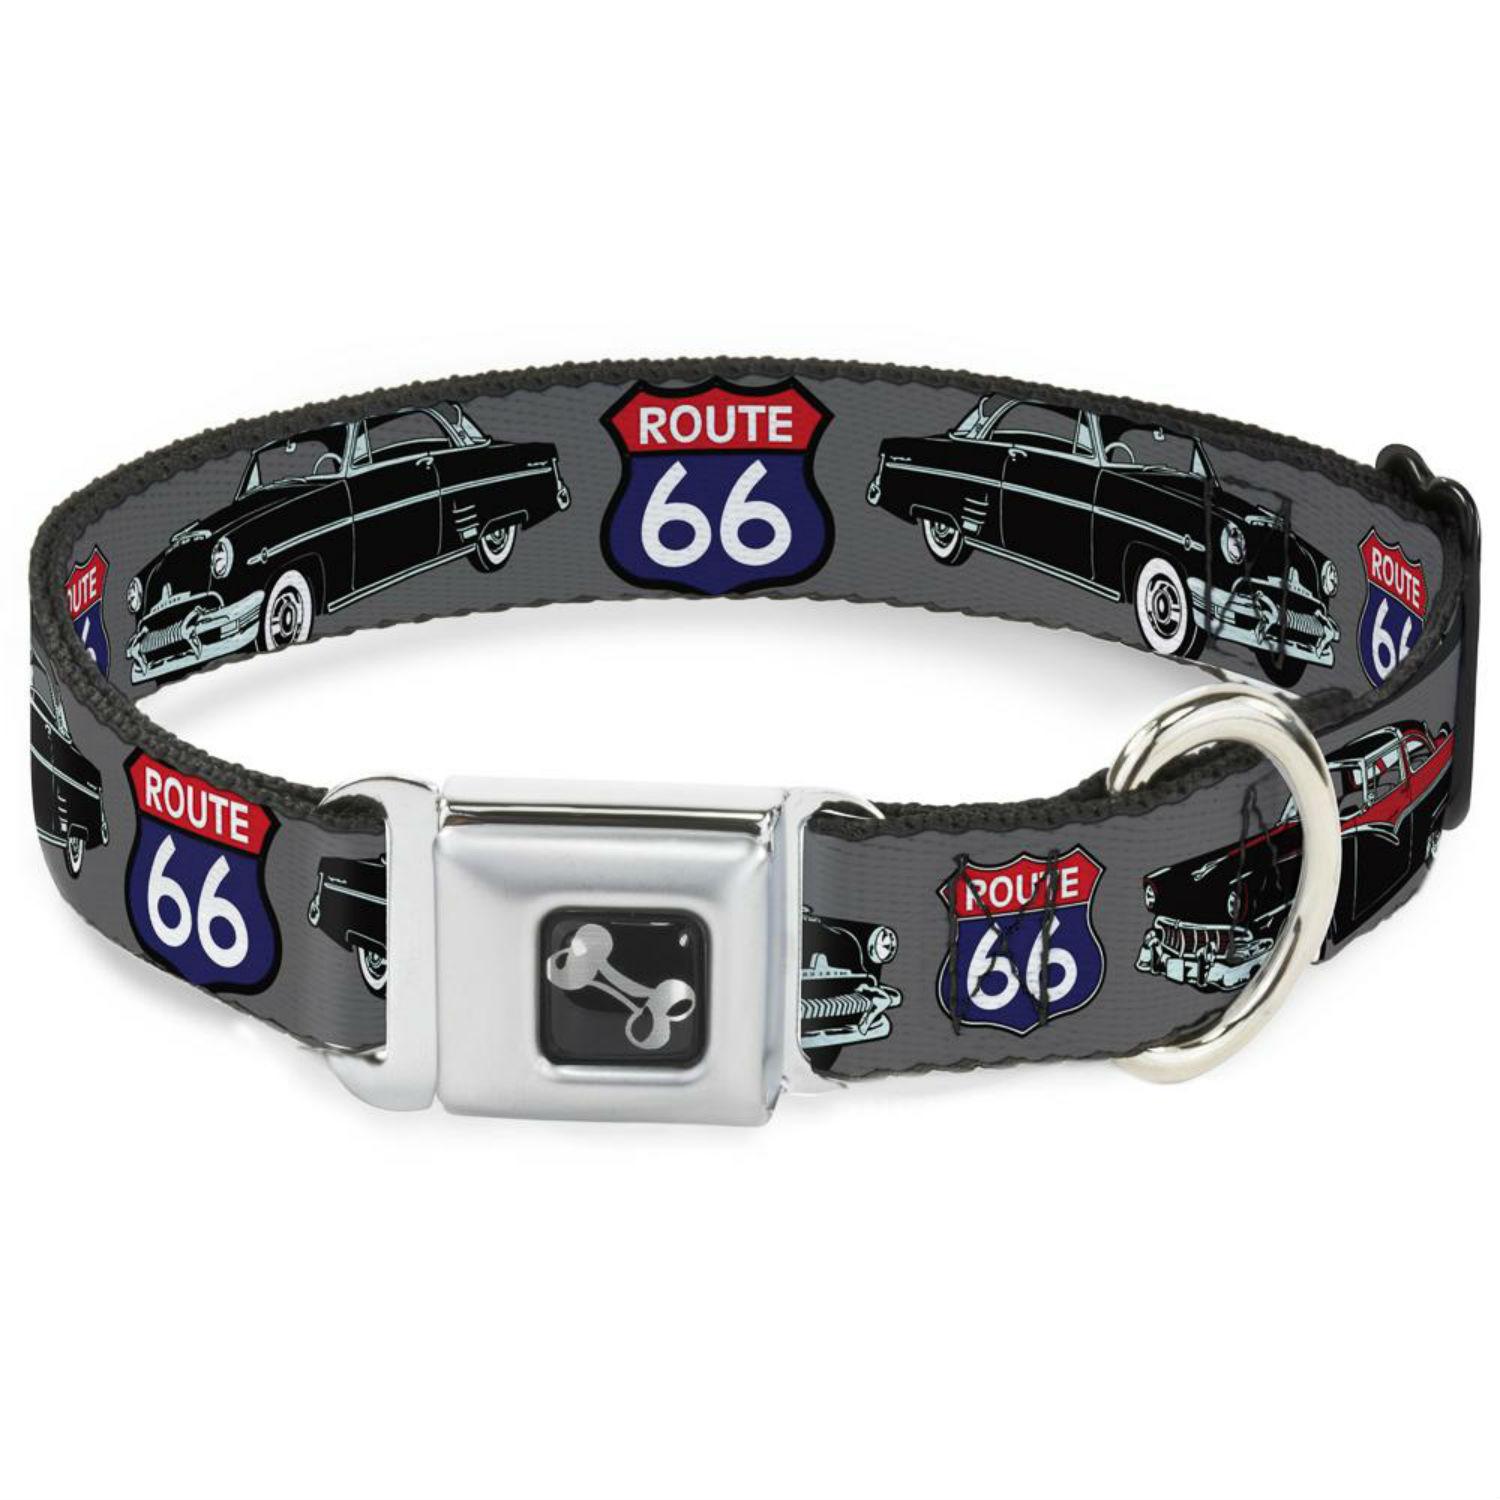 Route 66 Seatbelt Buckle Dog Collar by Buckle-Down